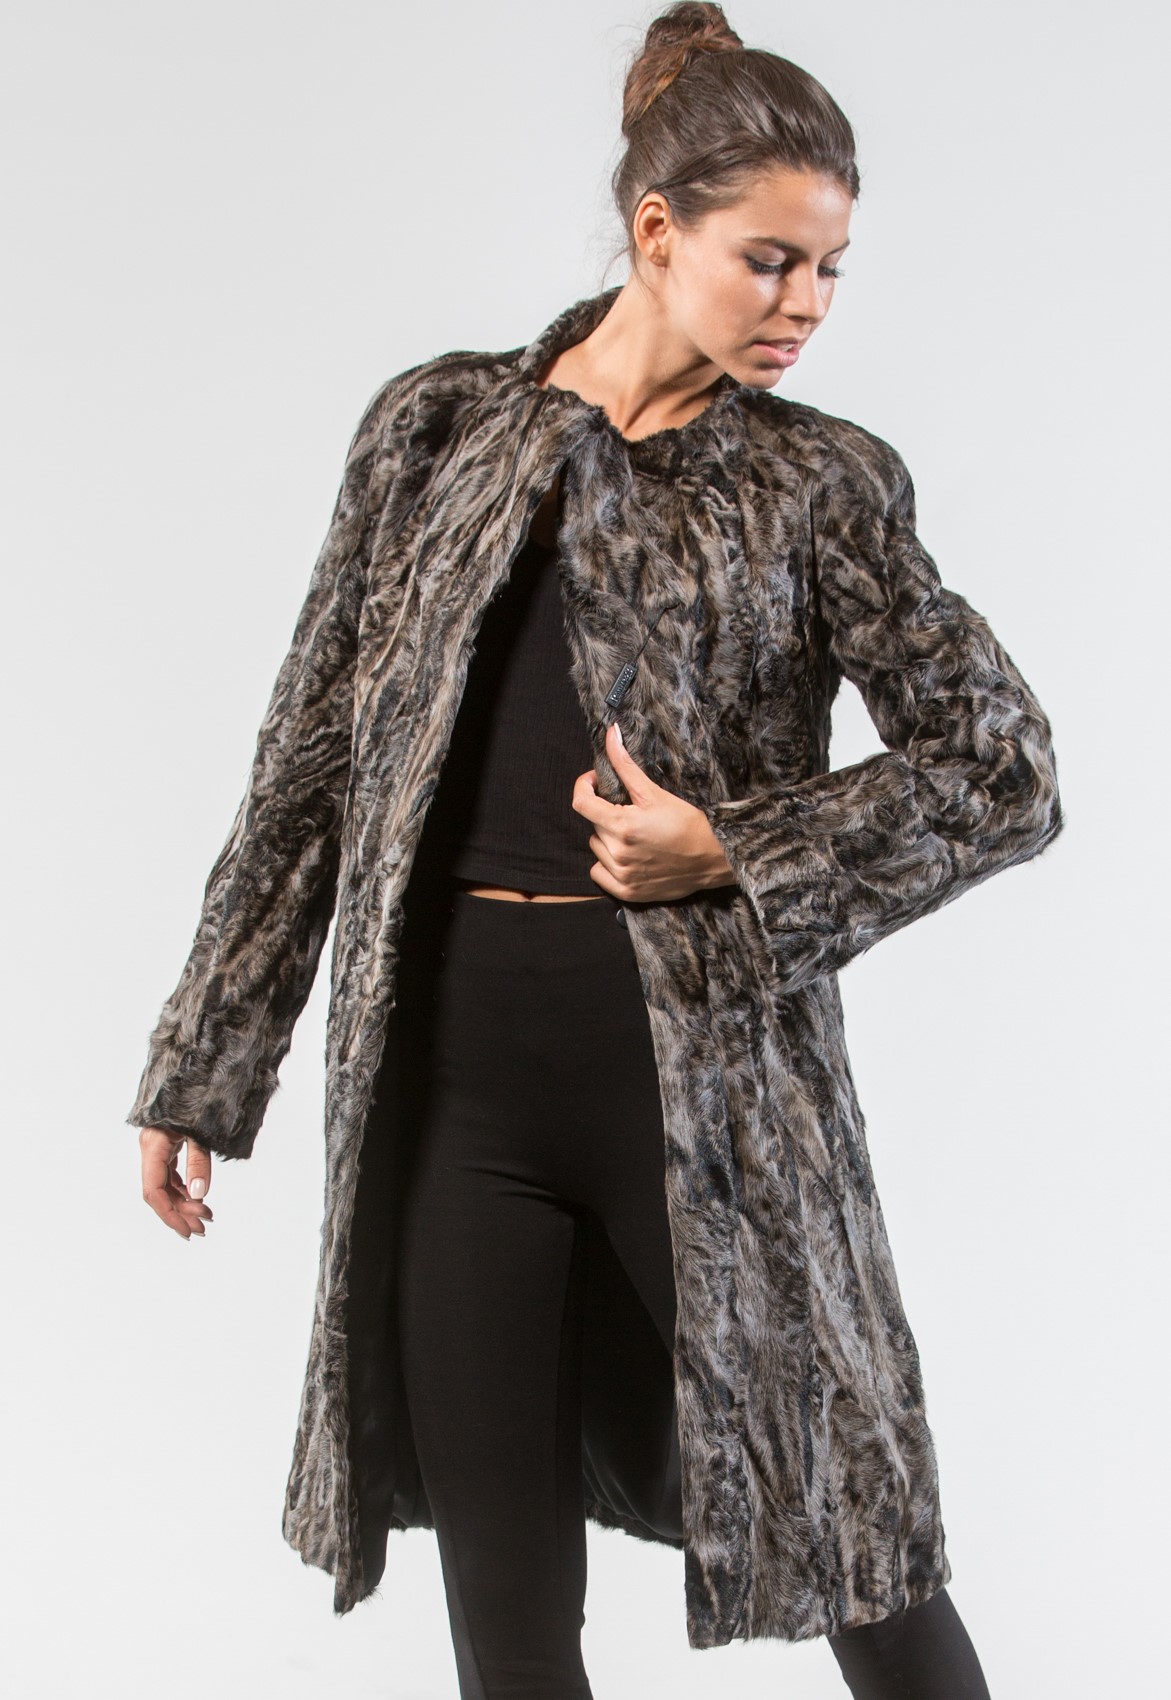 Azure Astrakhan Long Fur Jacket .100% Real Fur Coats and Accessories.